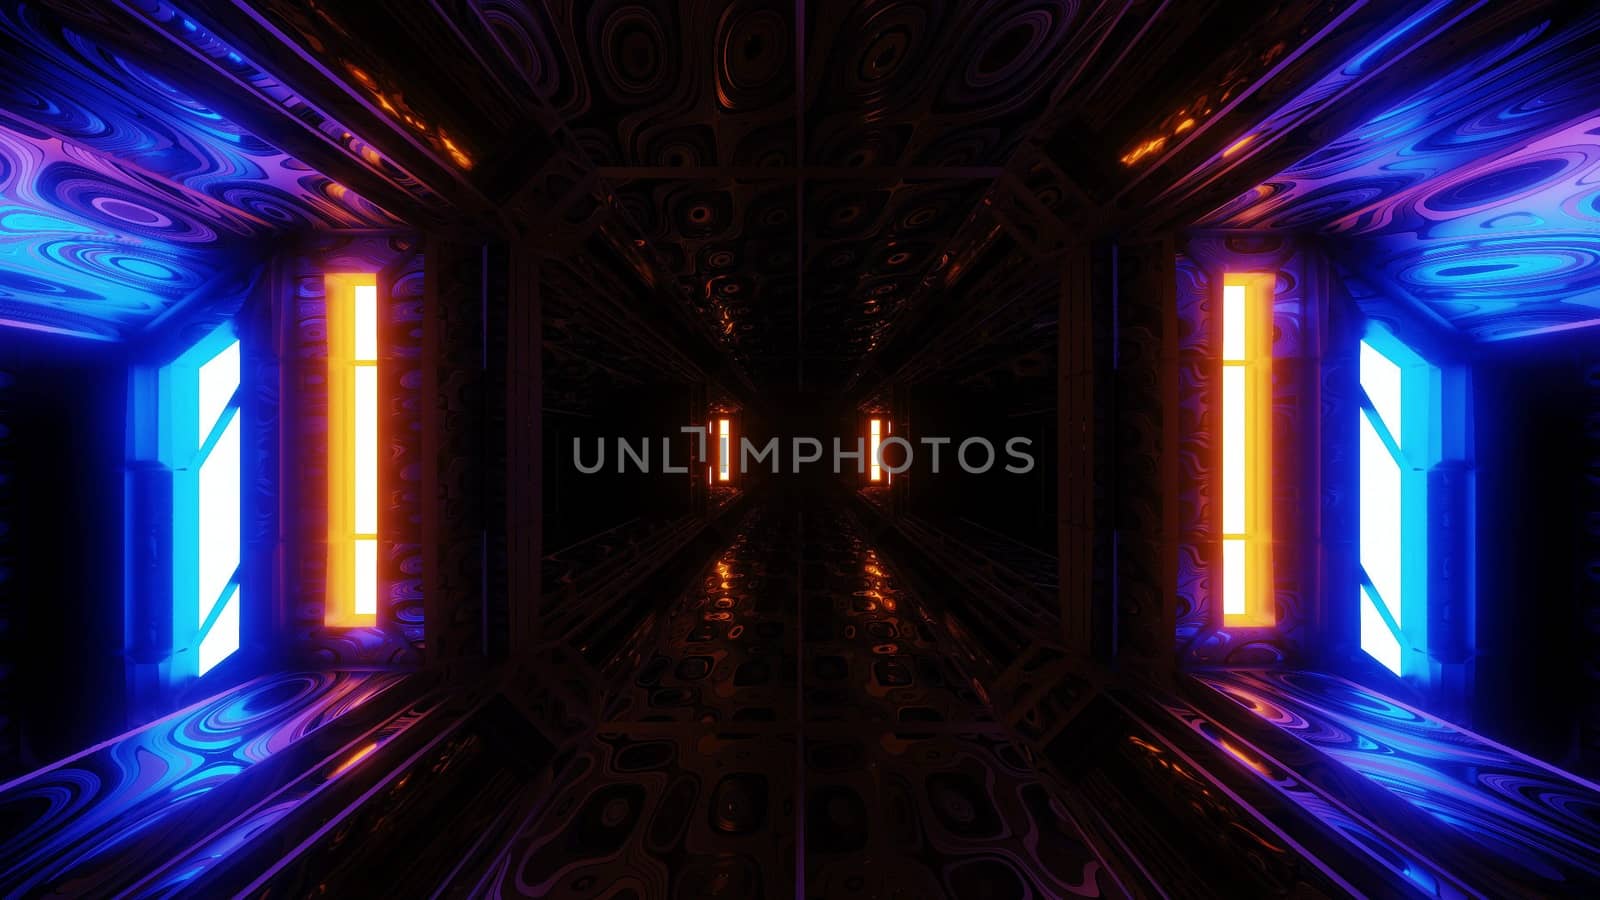 futuristic scifi space hangar tunnel corridor 3d illustration with abstract eye texture background wallpaper by tunnelmotions